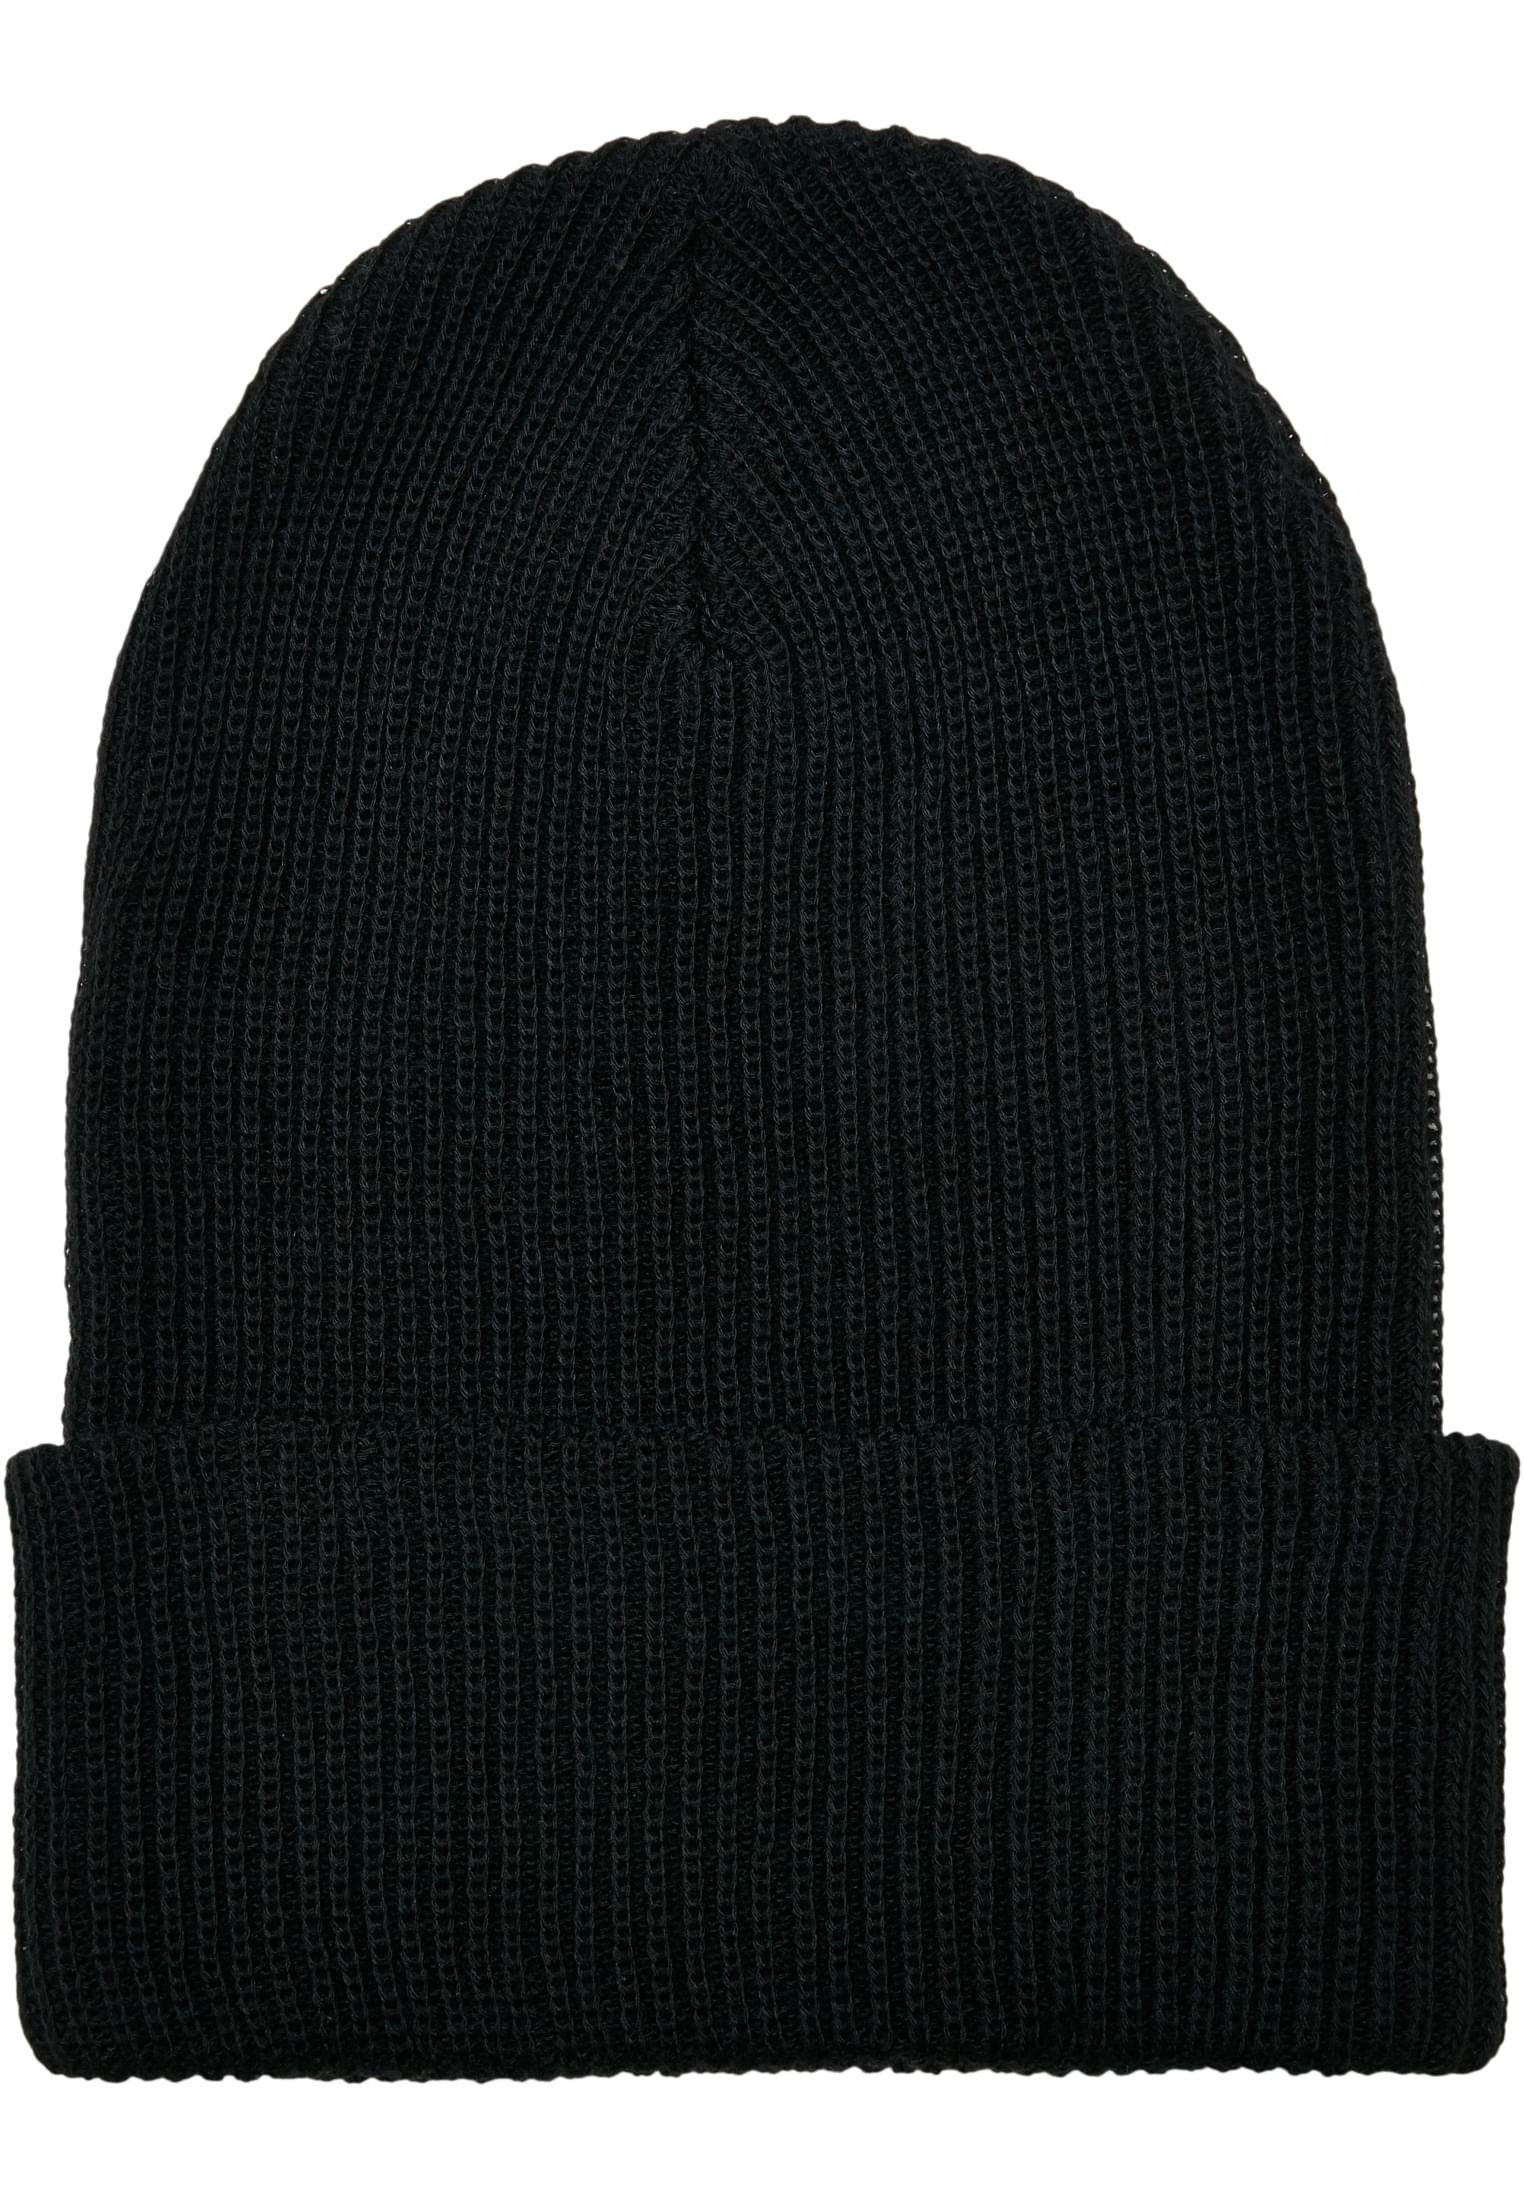 Accessoires Flexfit (1-St) Ribbed Recycled black Yarn Knit Beanie Beanie